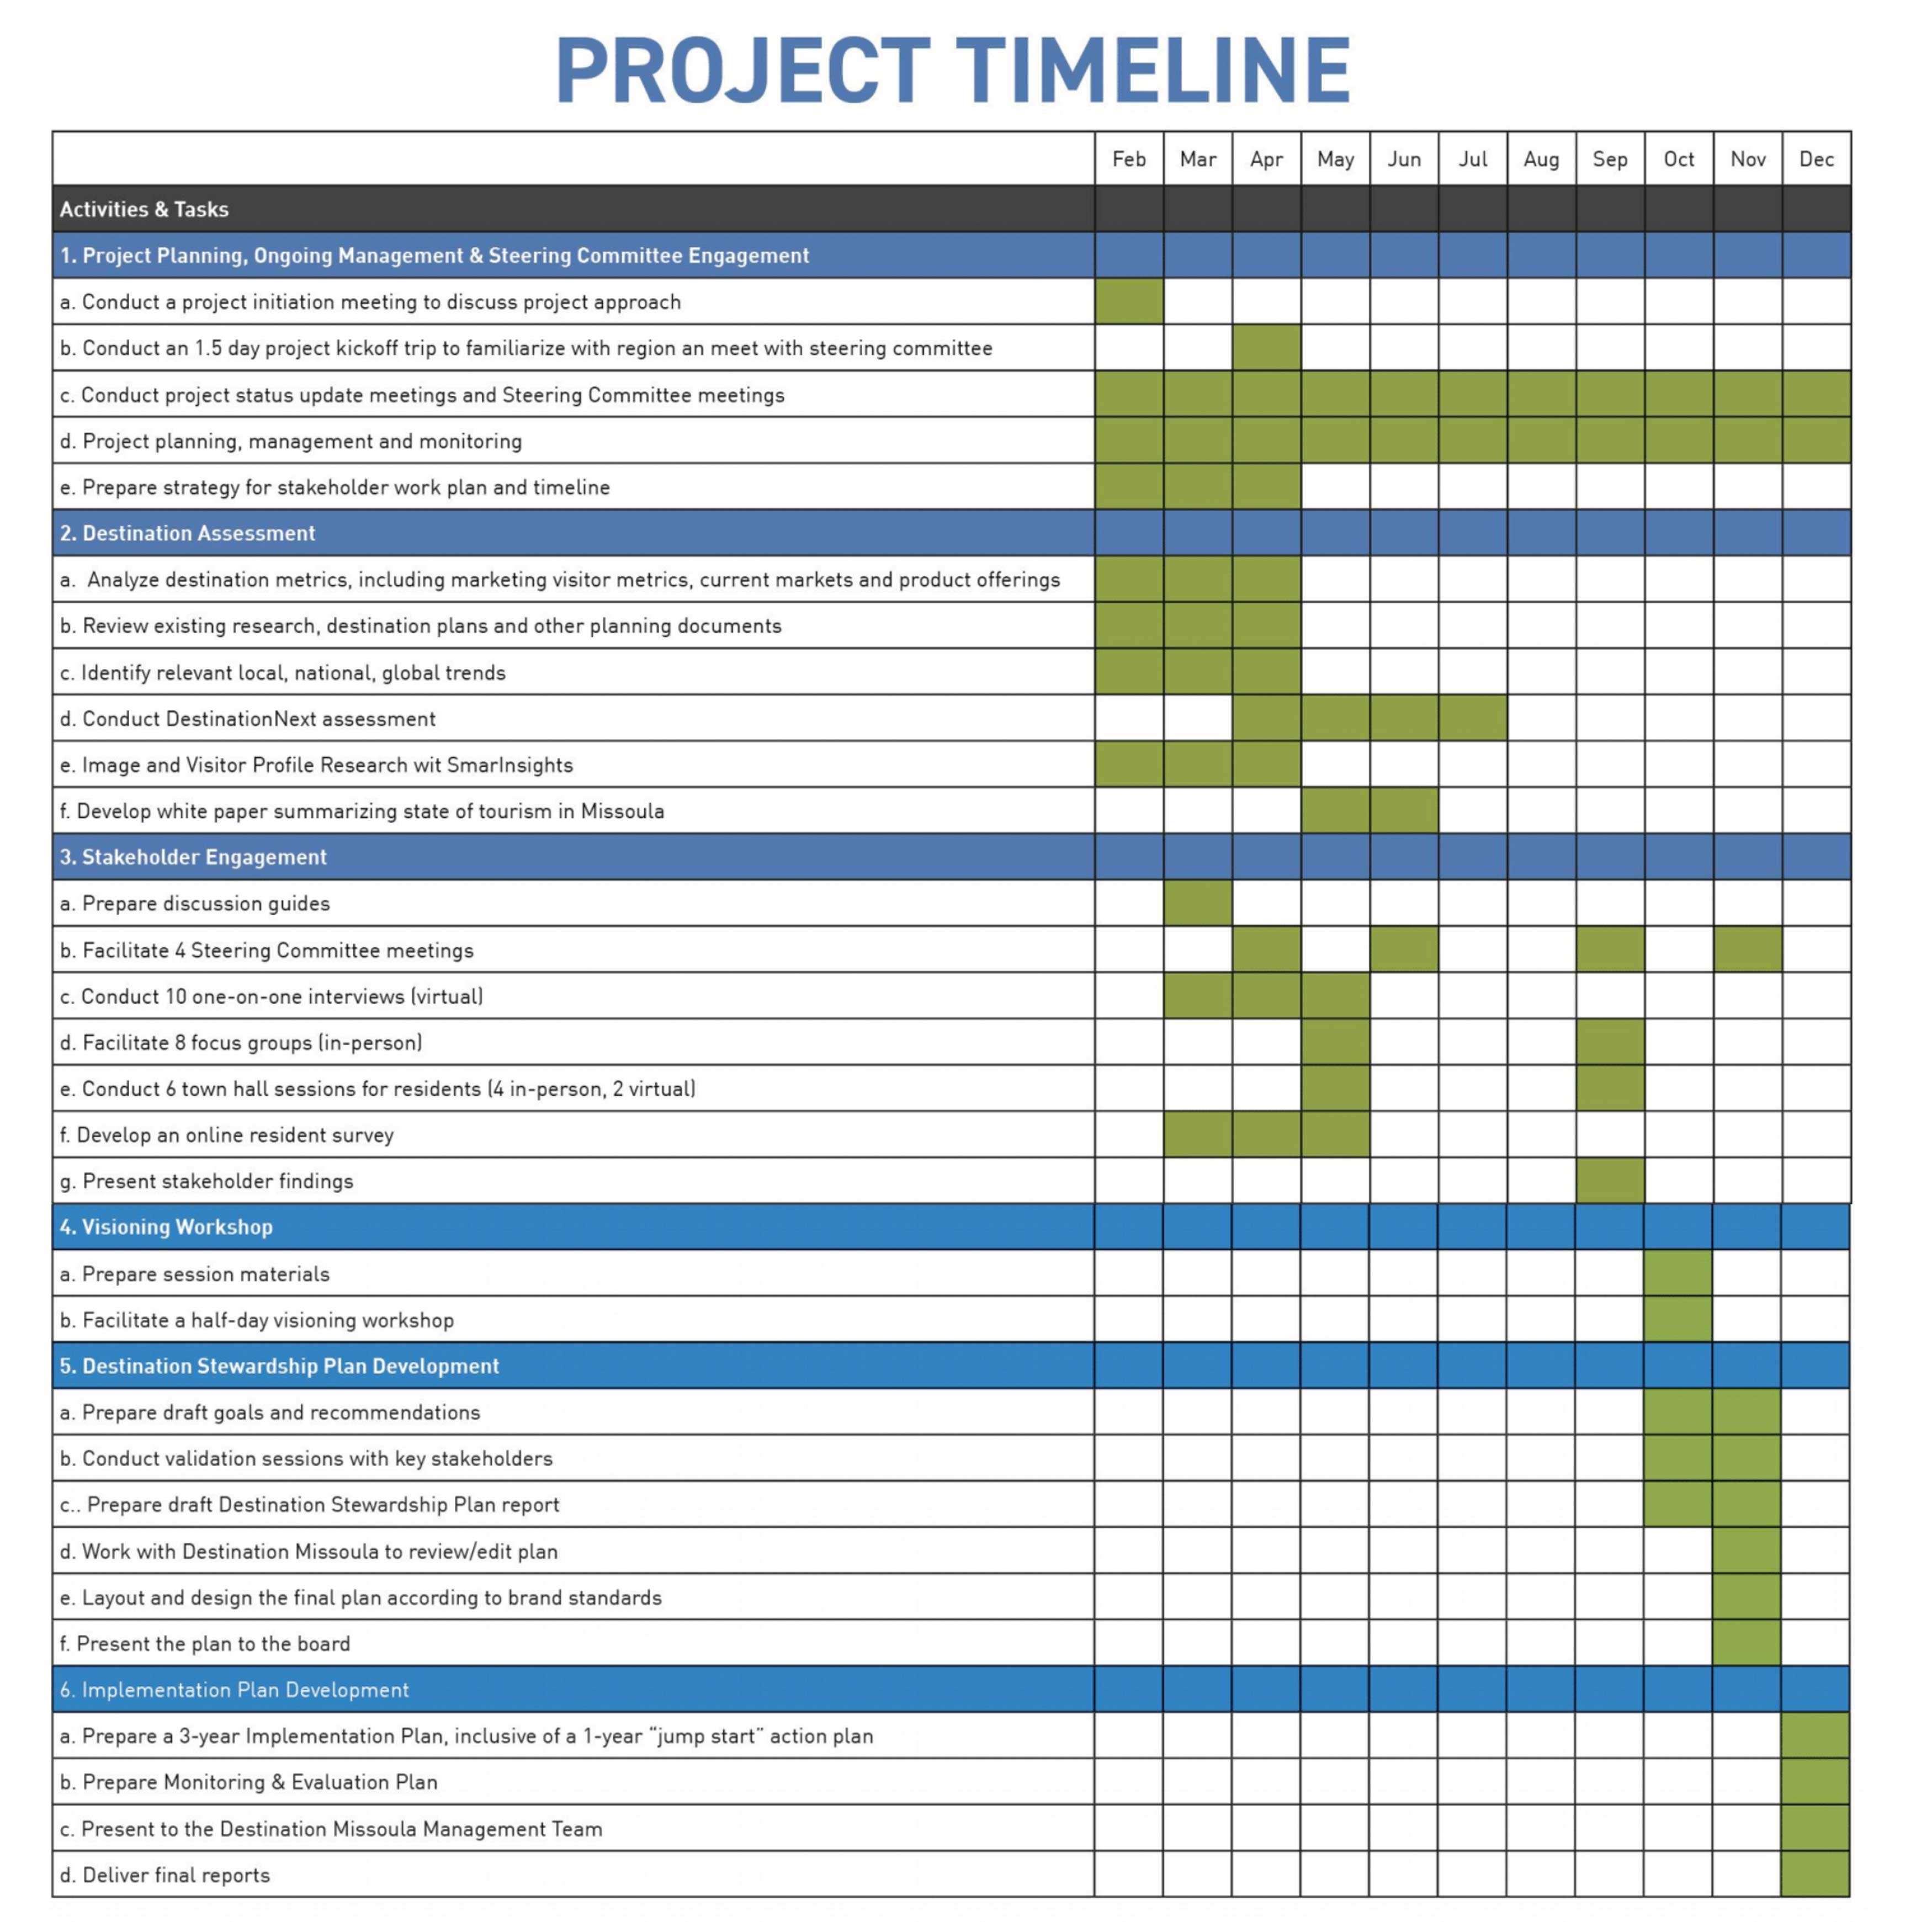 DSP project timeline information. Goals broken down by month.